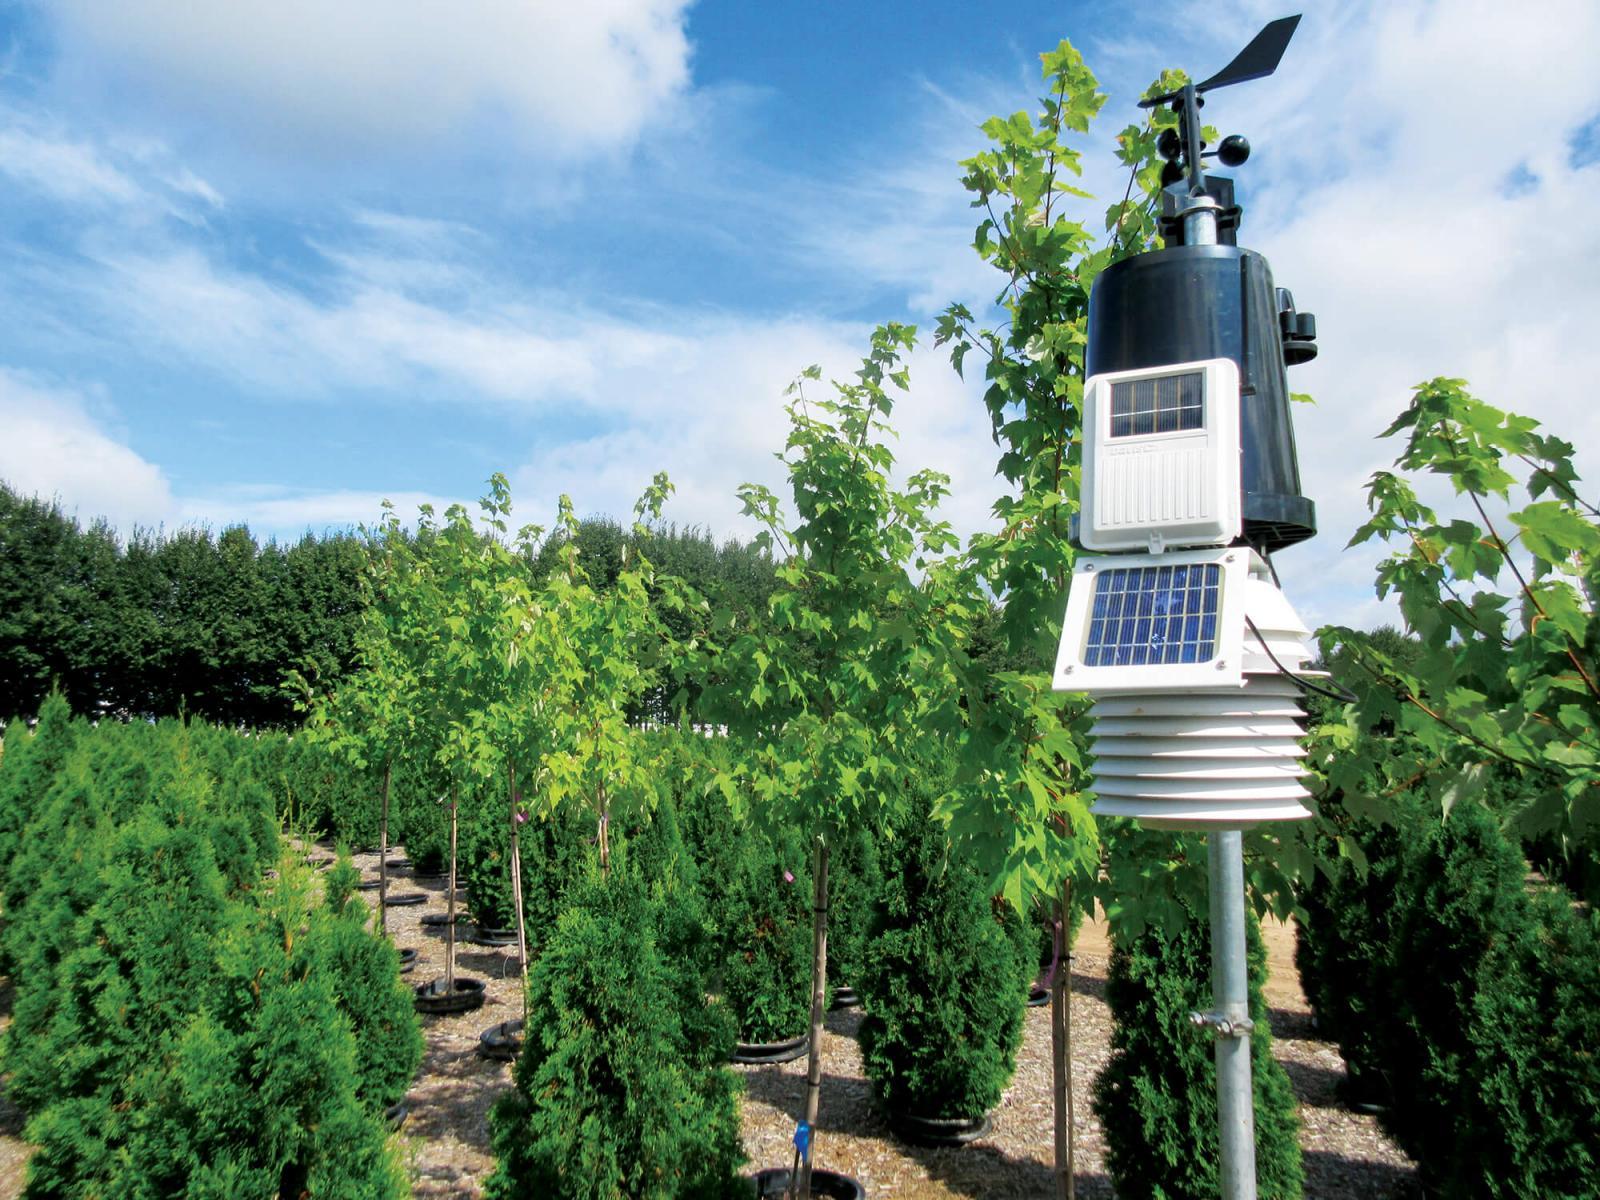 While it is not practical for growers to install and monitor stem psychrometer sensors, research will determine species-specific coefficients that can be used with a weather station for field applications.